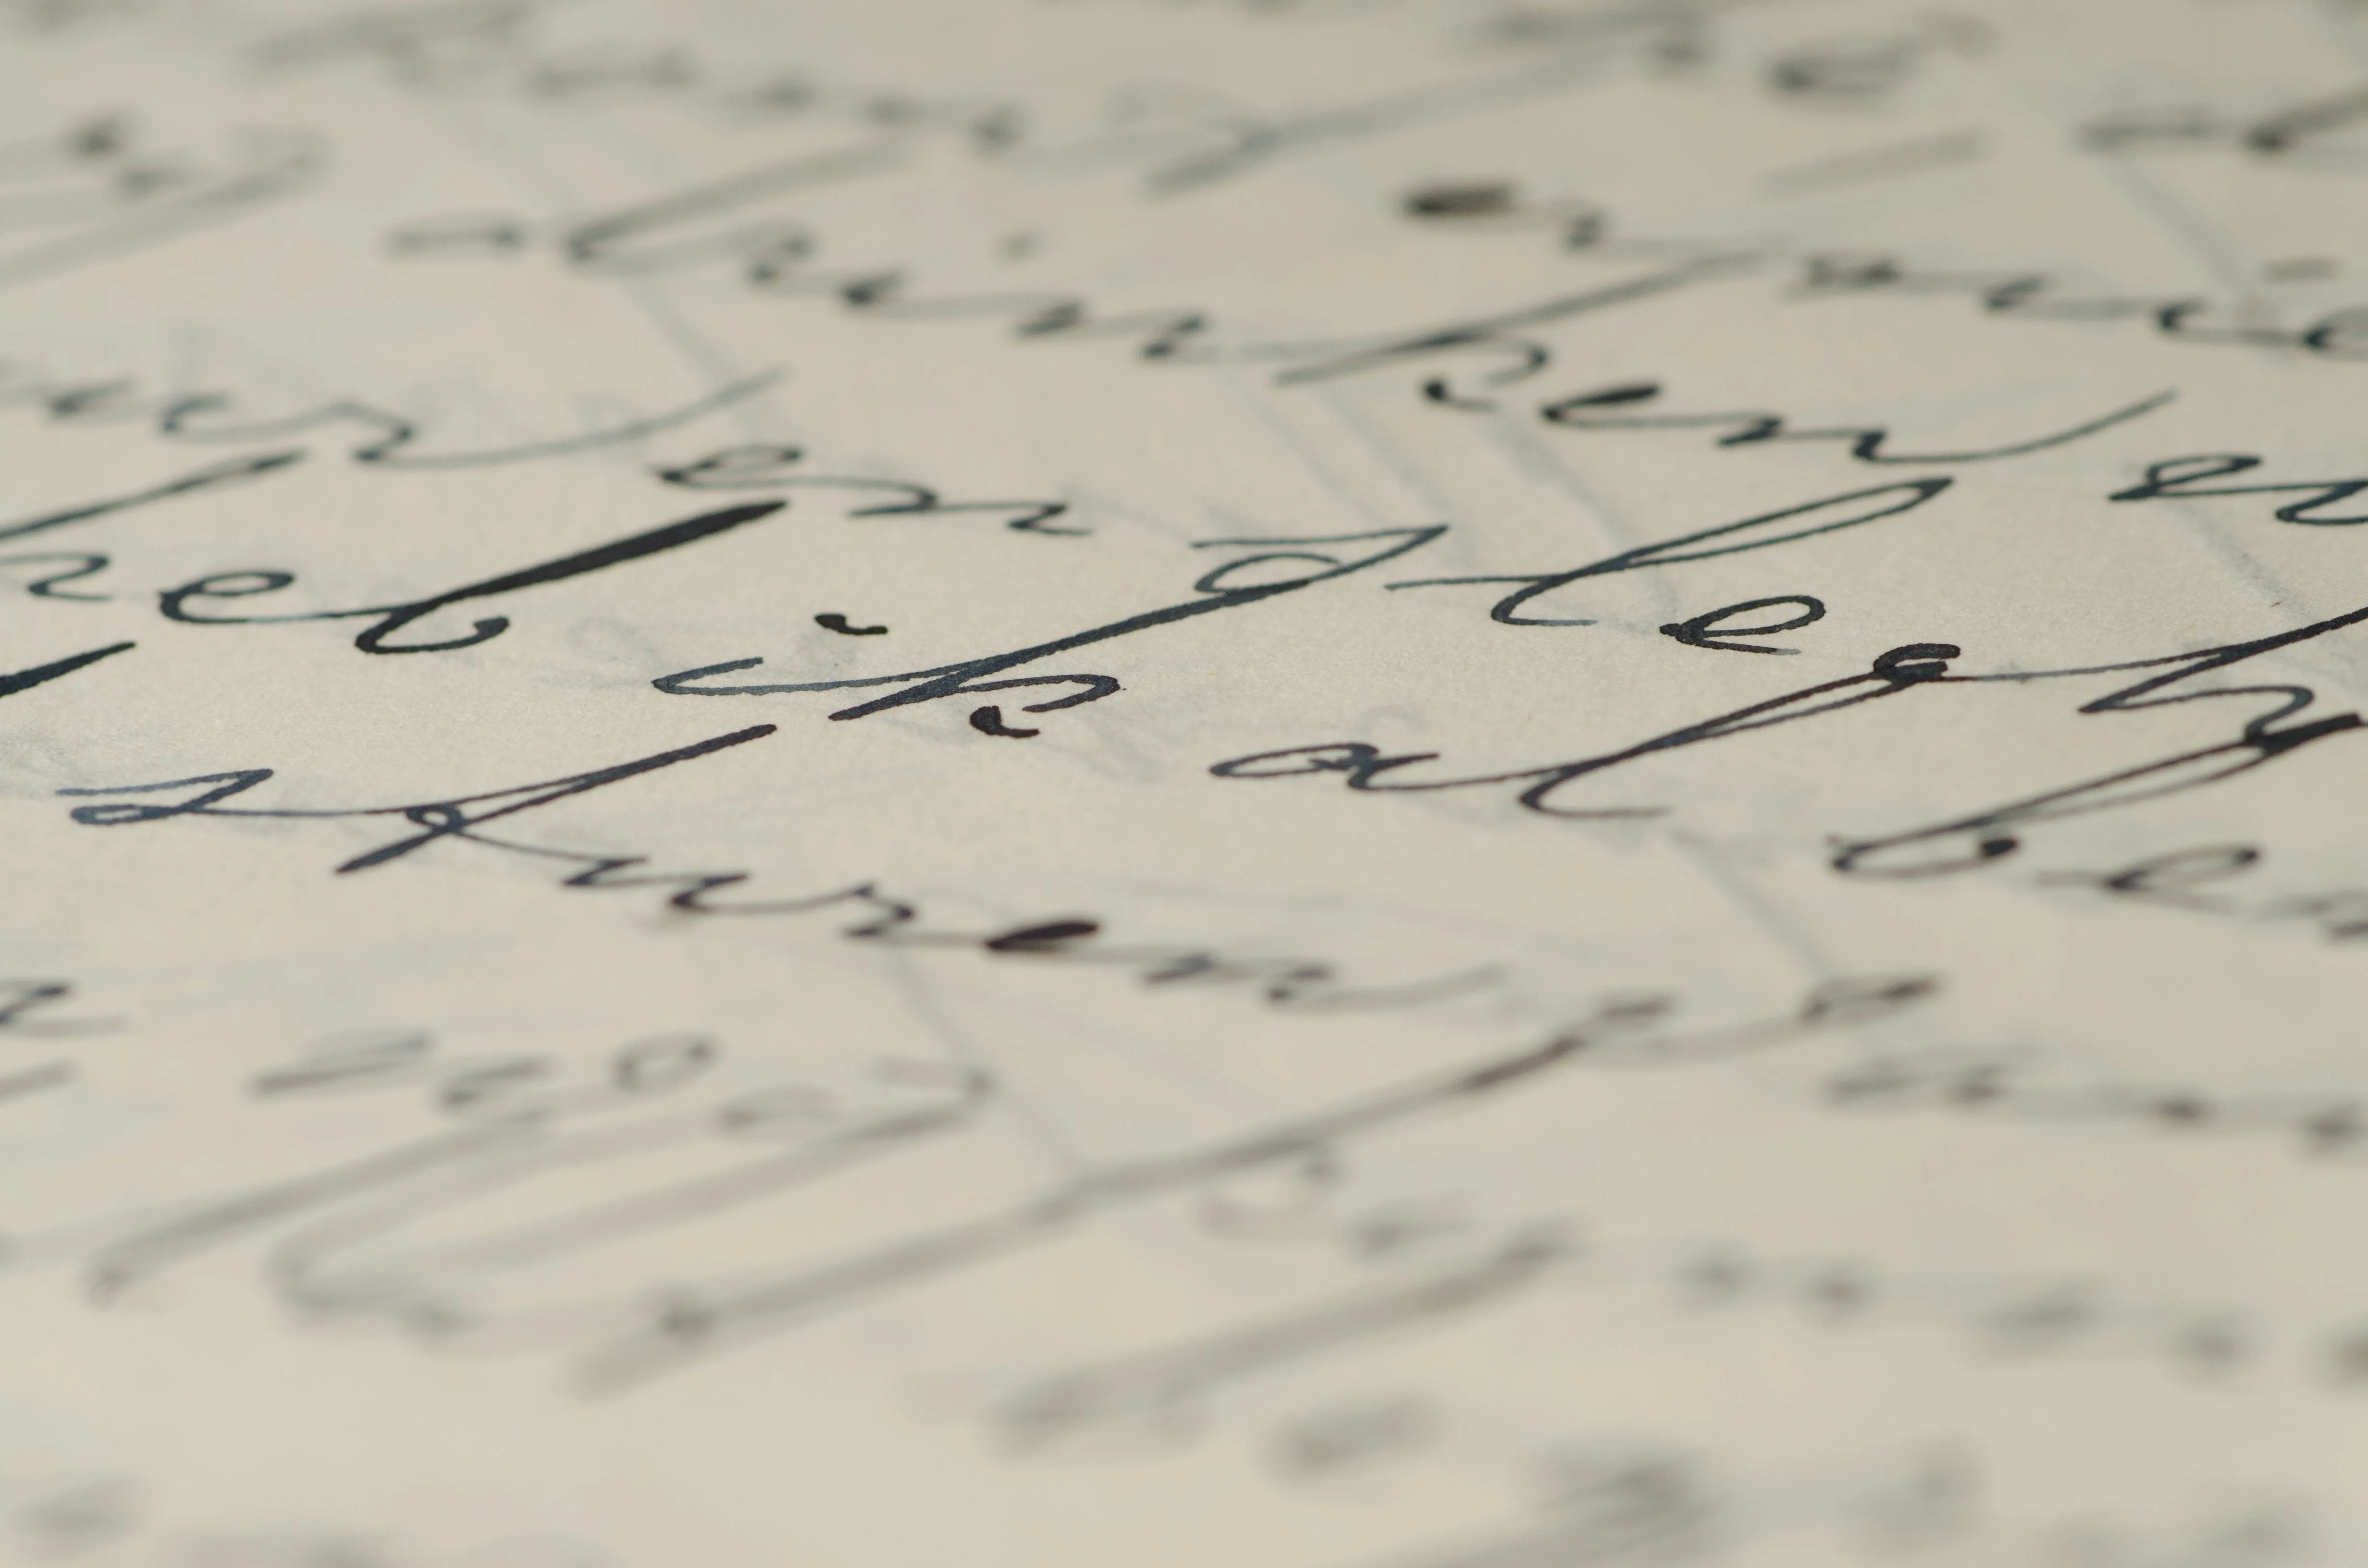 The Art of Calligraphy: Writing as an Art Form